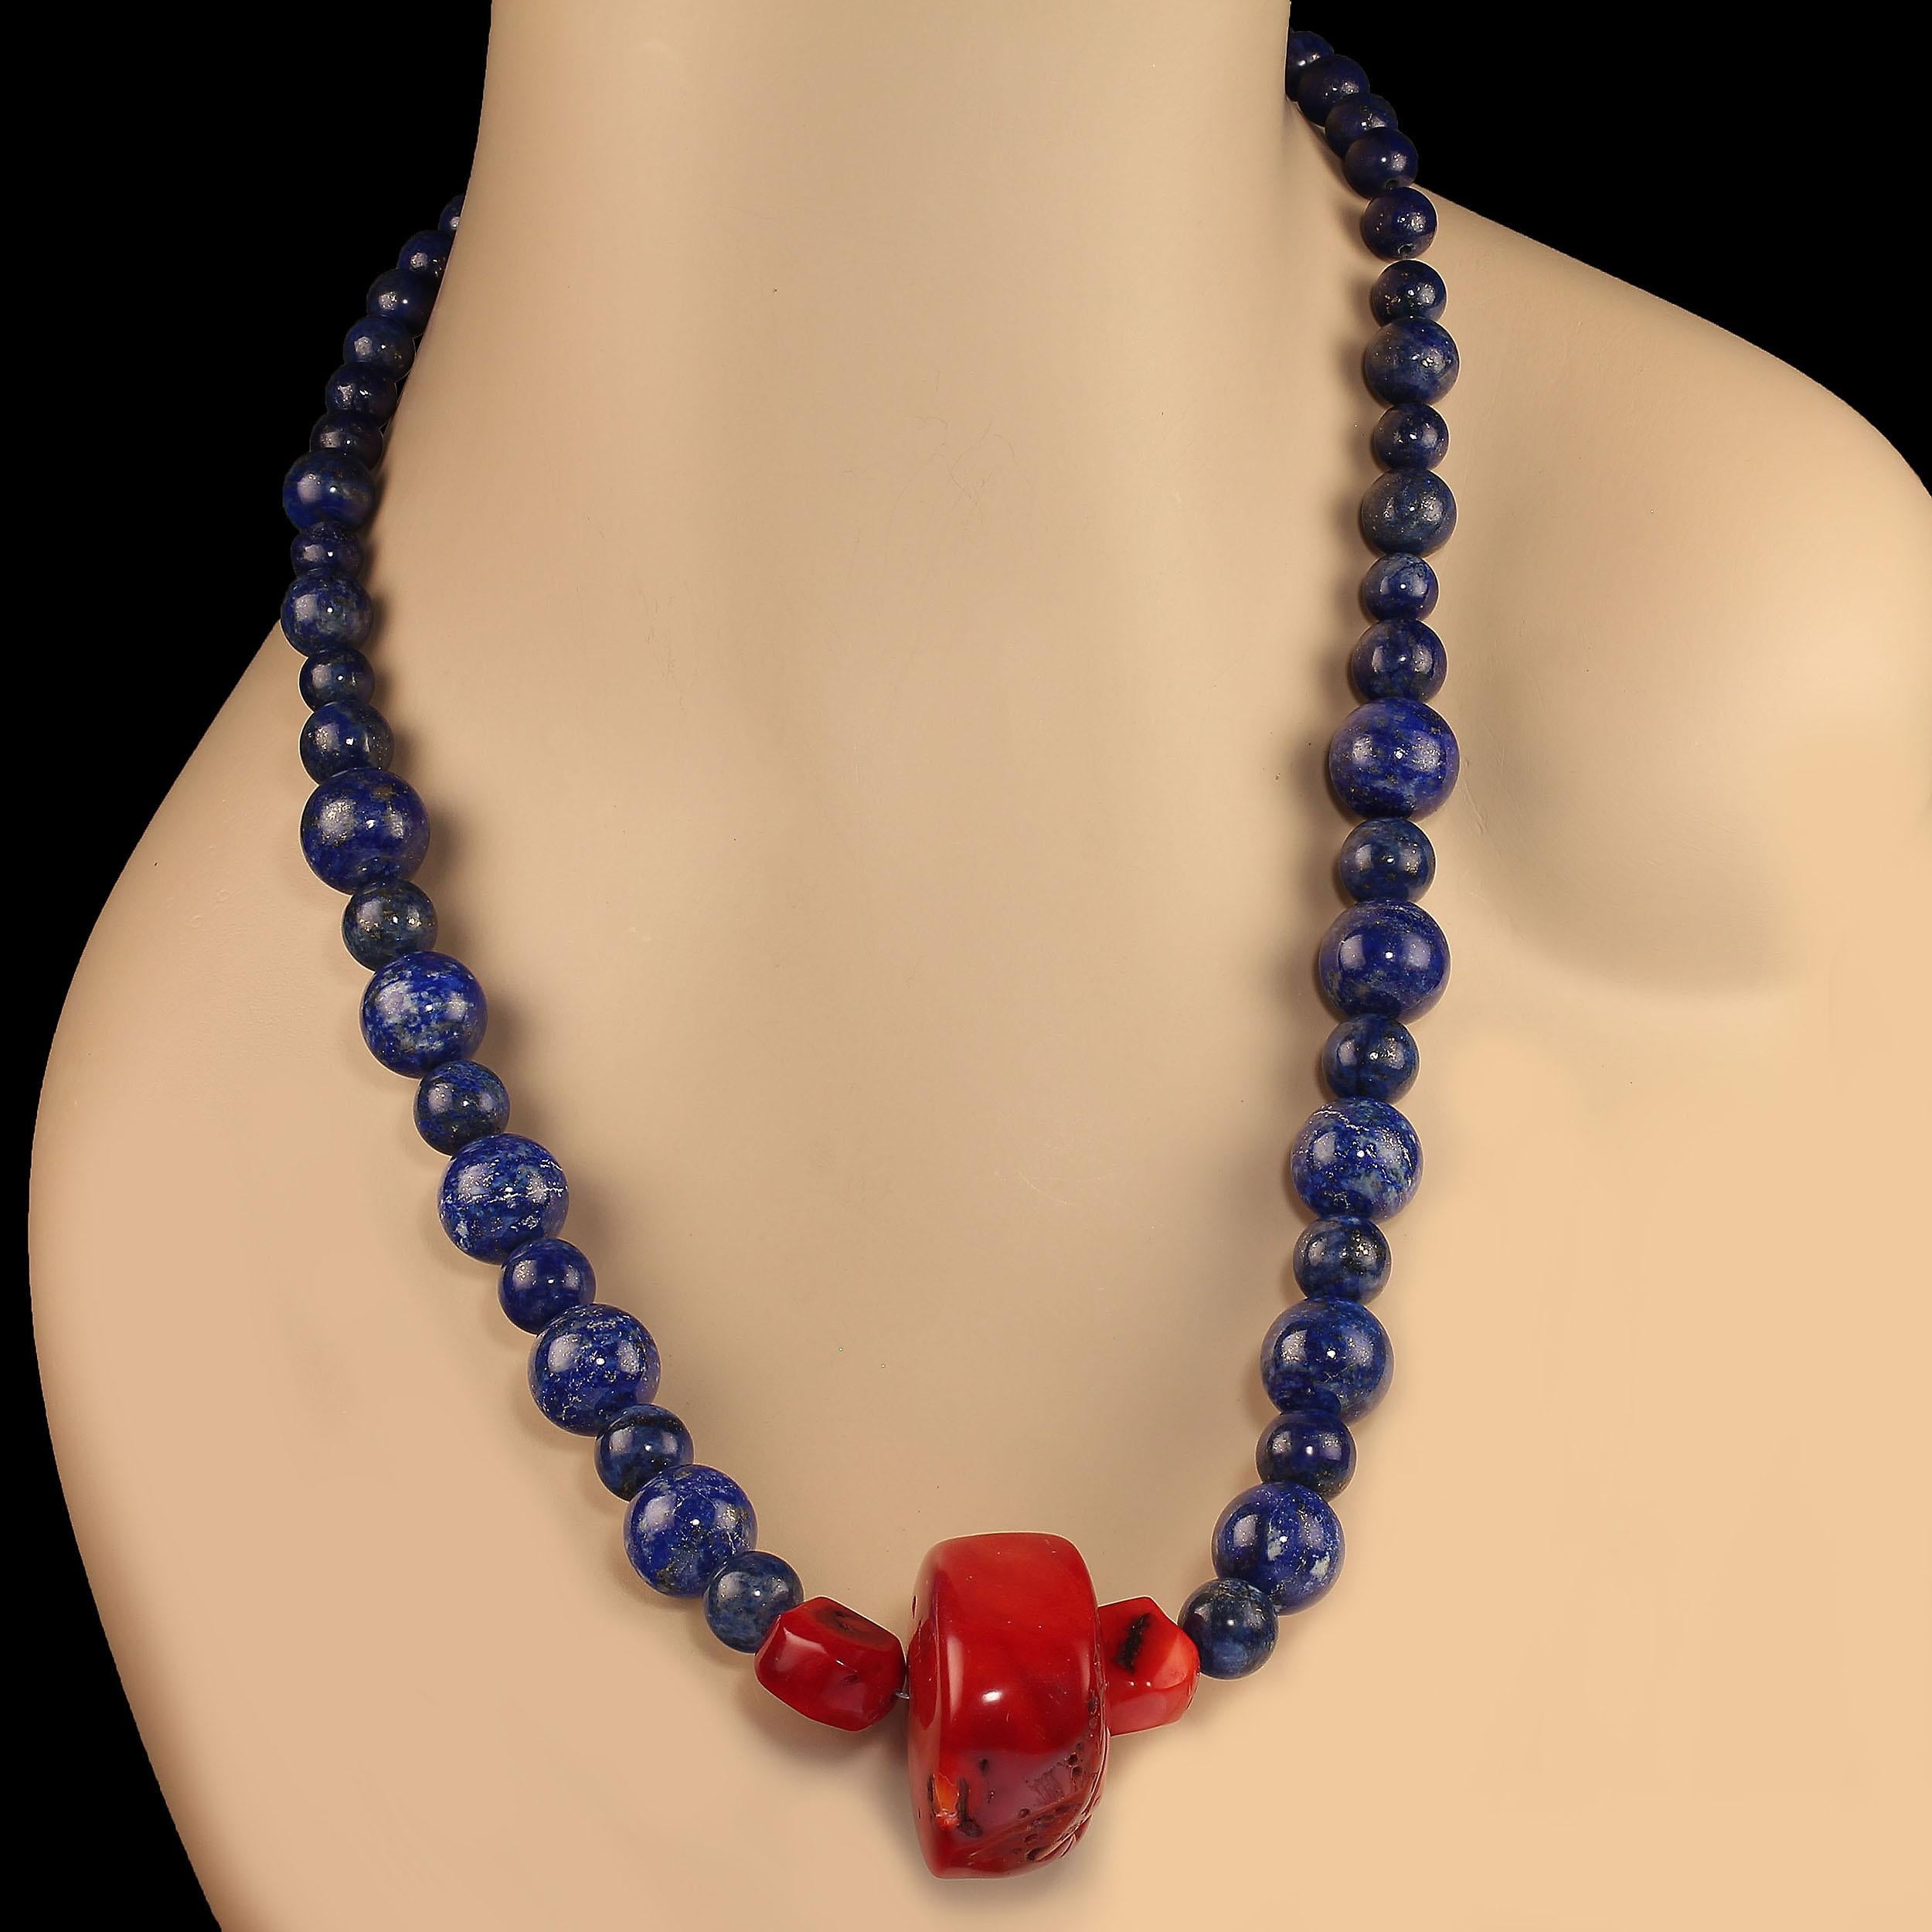 Statement necklace of gorgeous blue lapis lazuli in three sizes of smooth round beads in 14, 10, and 8 MM.  The red bamboo coral focal features a large roundish 35mm piece accented with two smaller pieces. This 23-inch necklace is secured with a